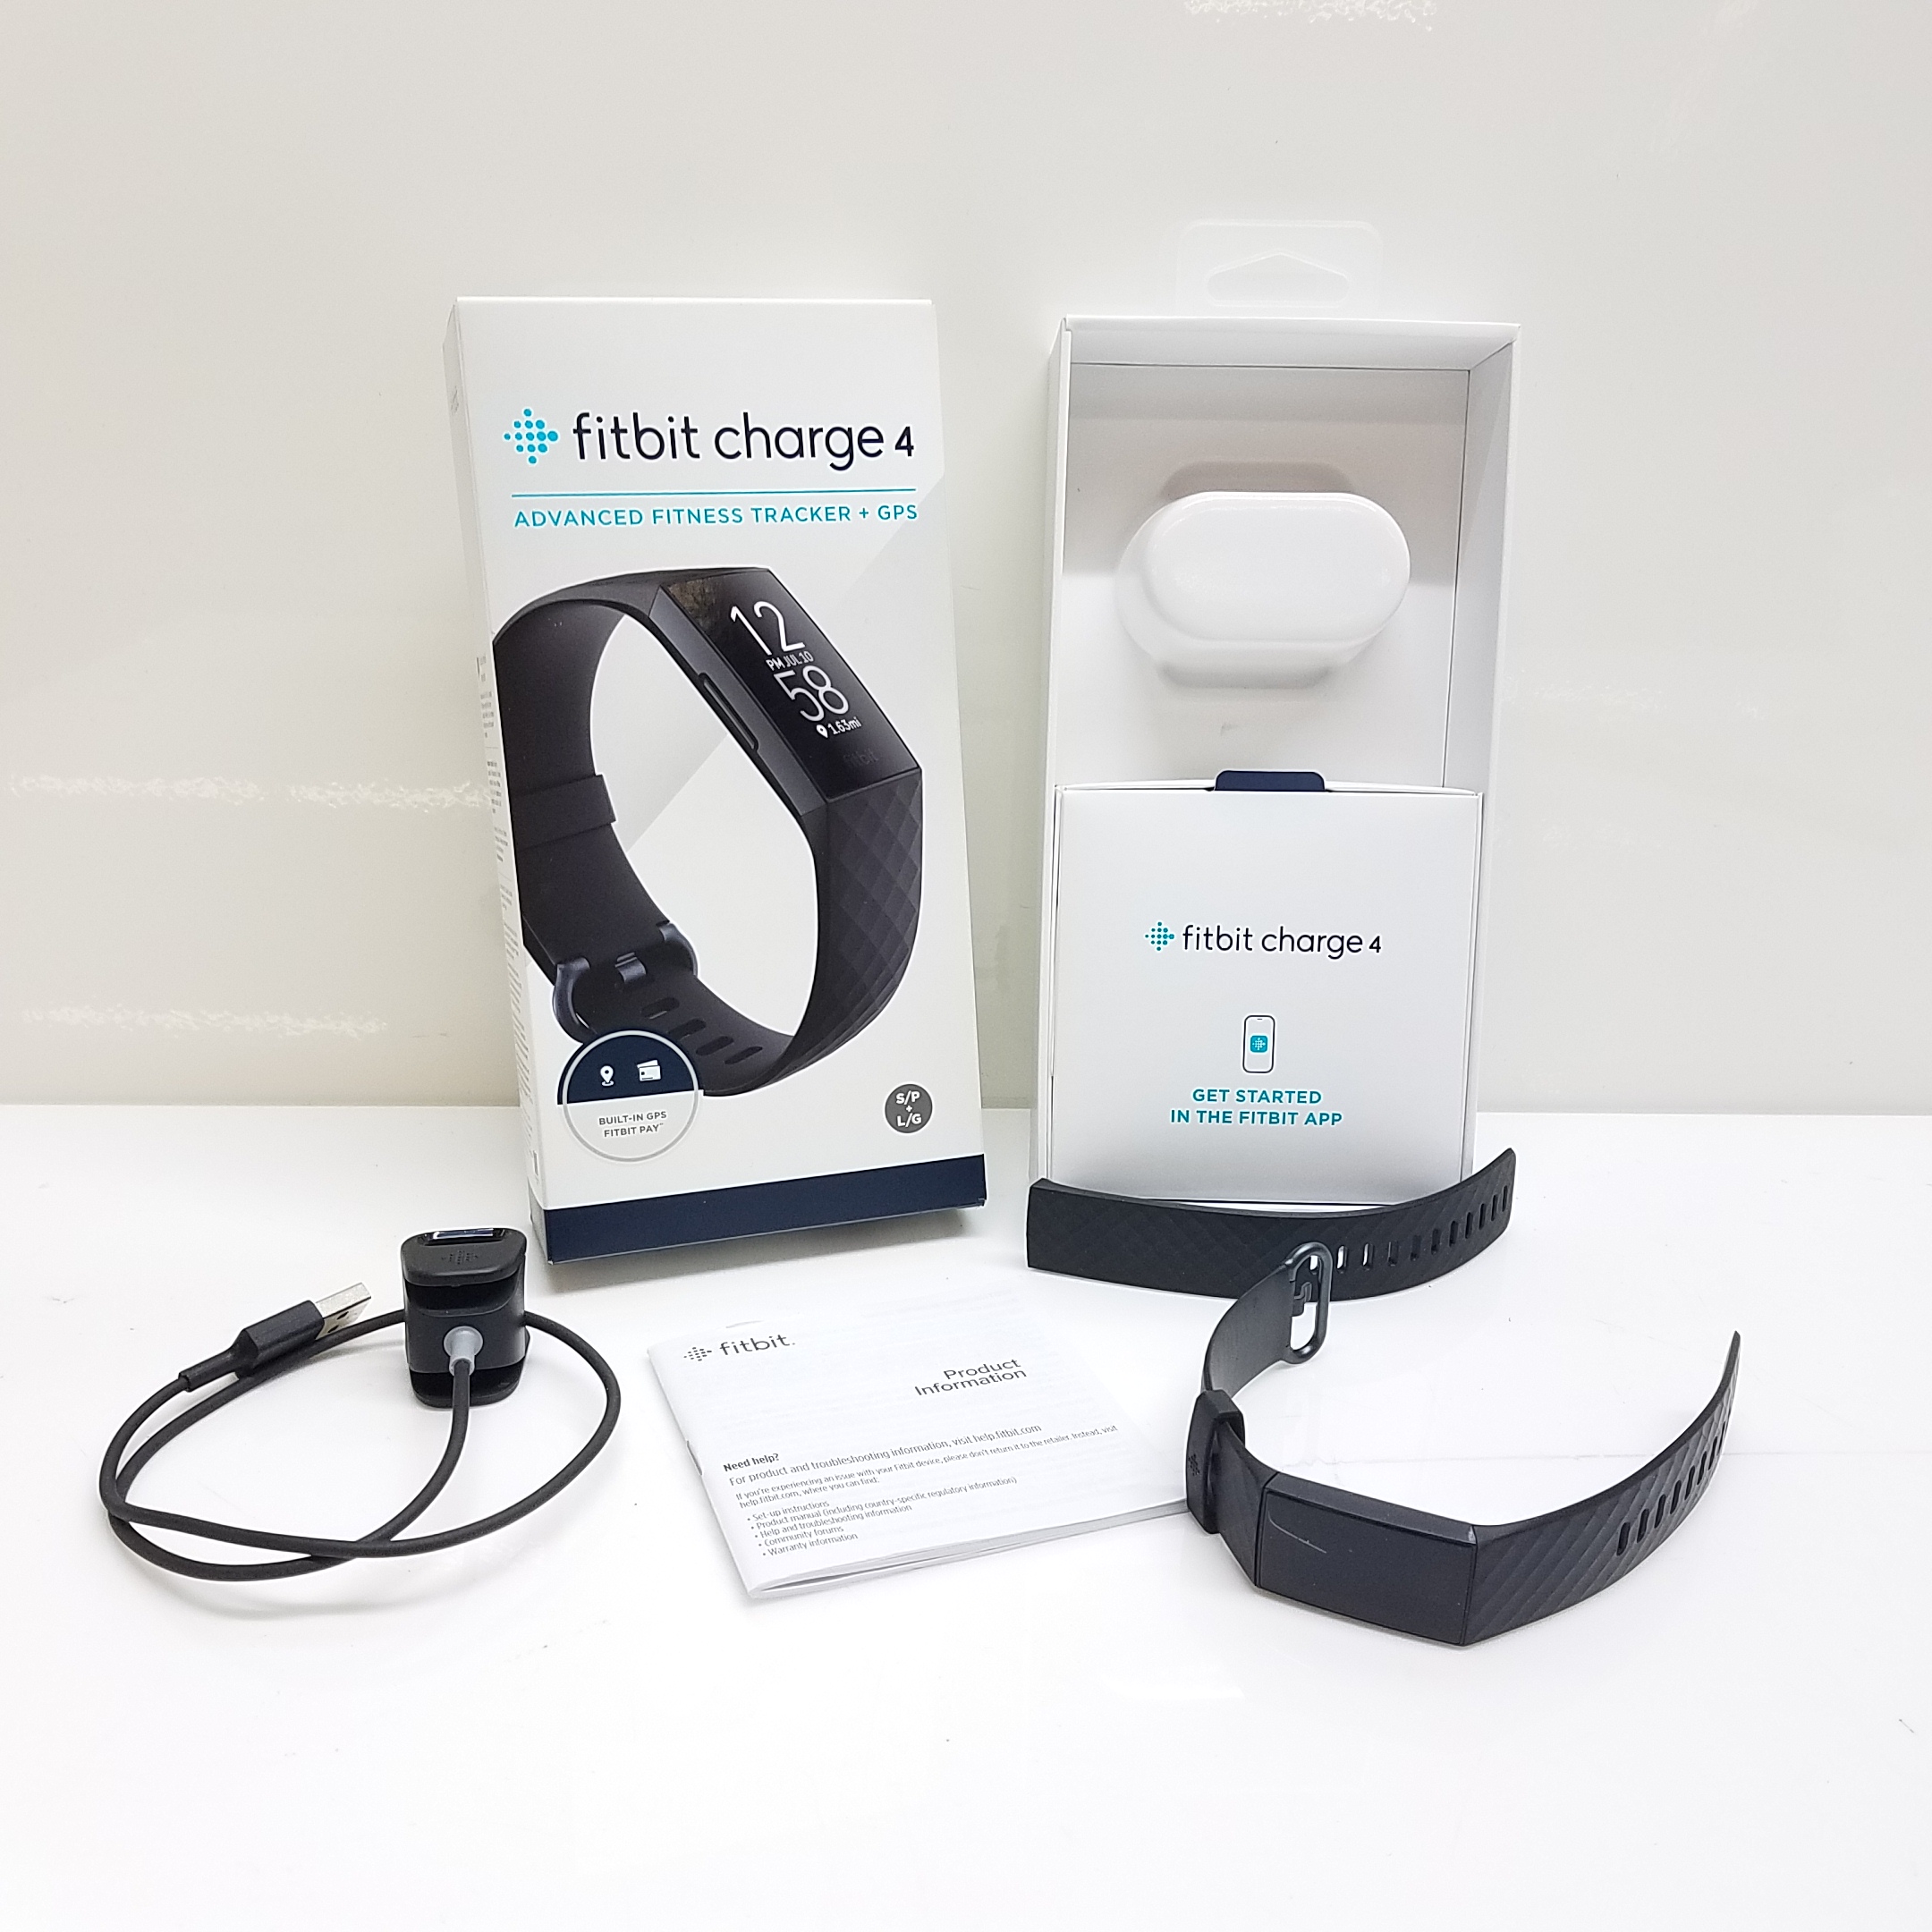 Buy the Fitbit Charge Advance Fitness Tracker + GPS | GoodwillFinds